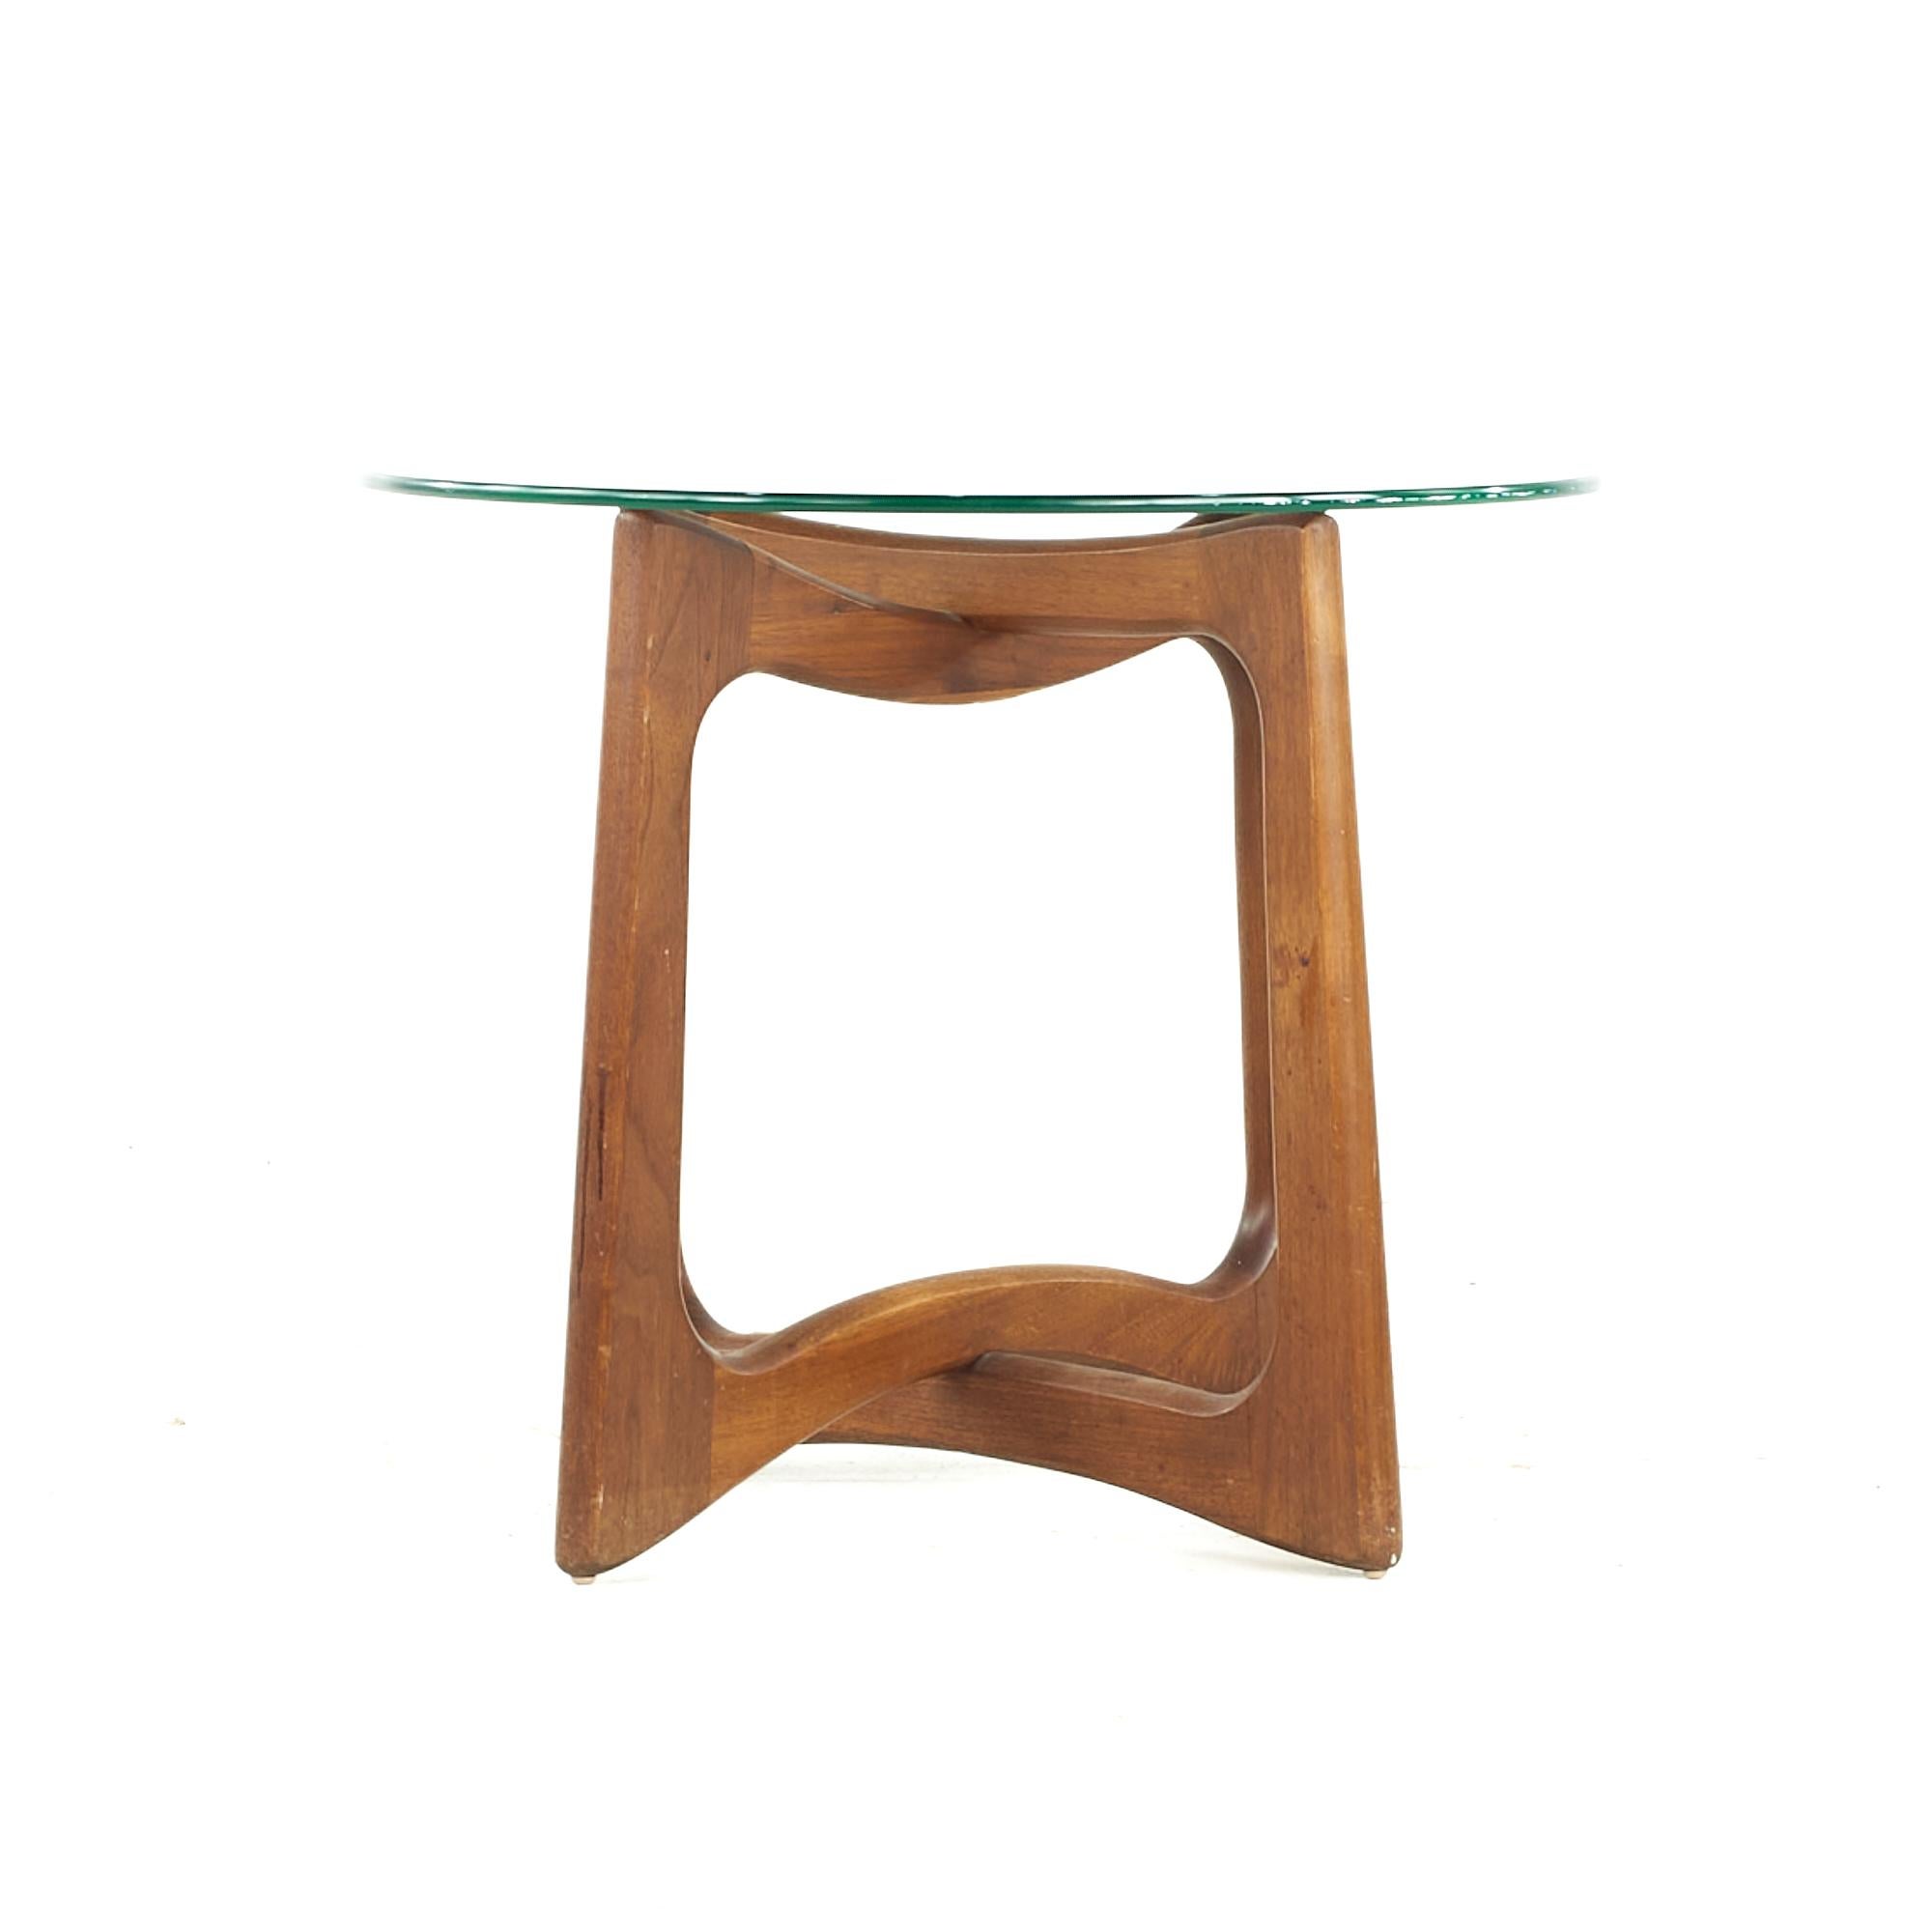 Late 20th Century Adrian Pearsall Midcentury Walnut and Glass Side Tables, Pair For Sale